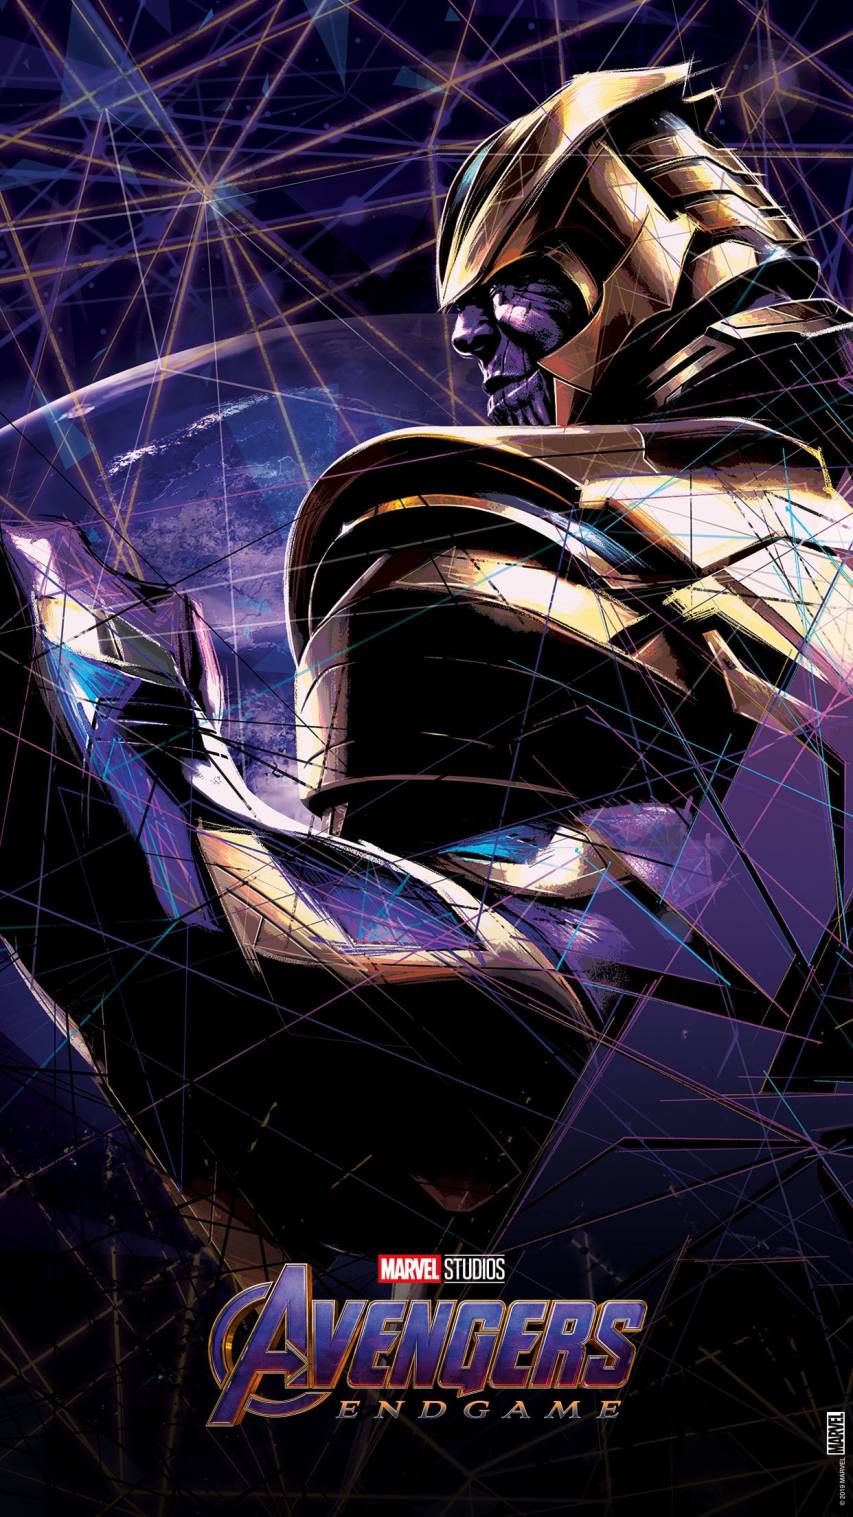 Avengers endgame Picture Backgrounds for Phone